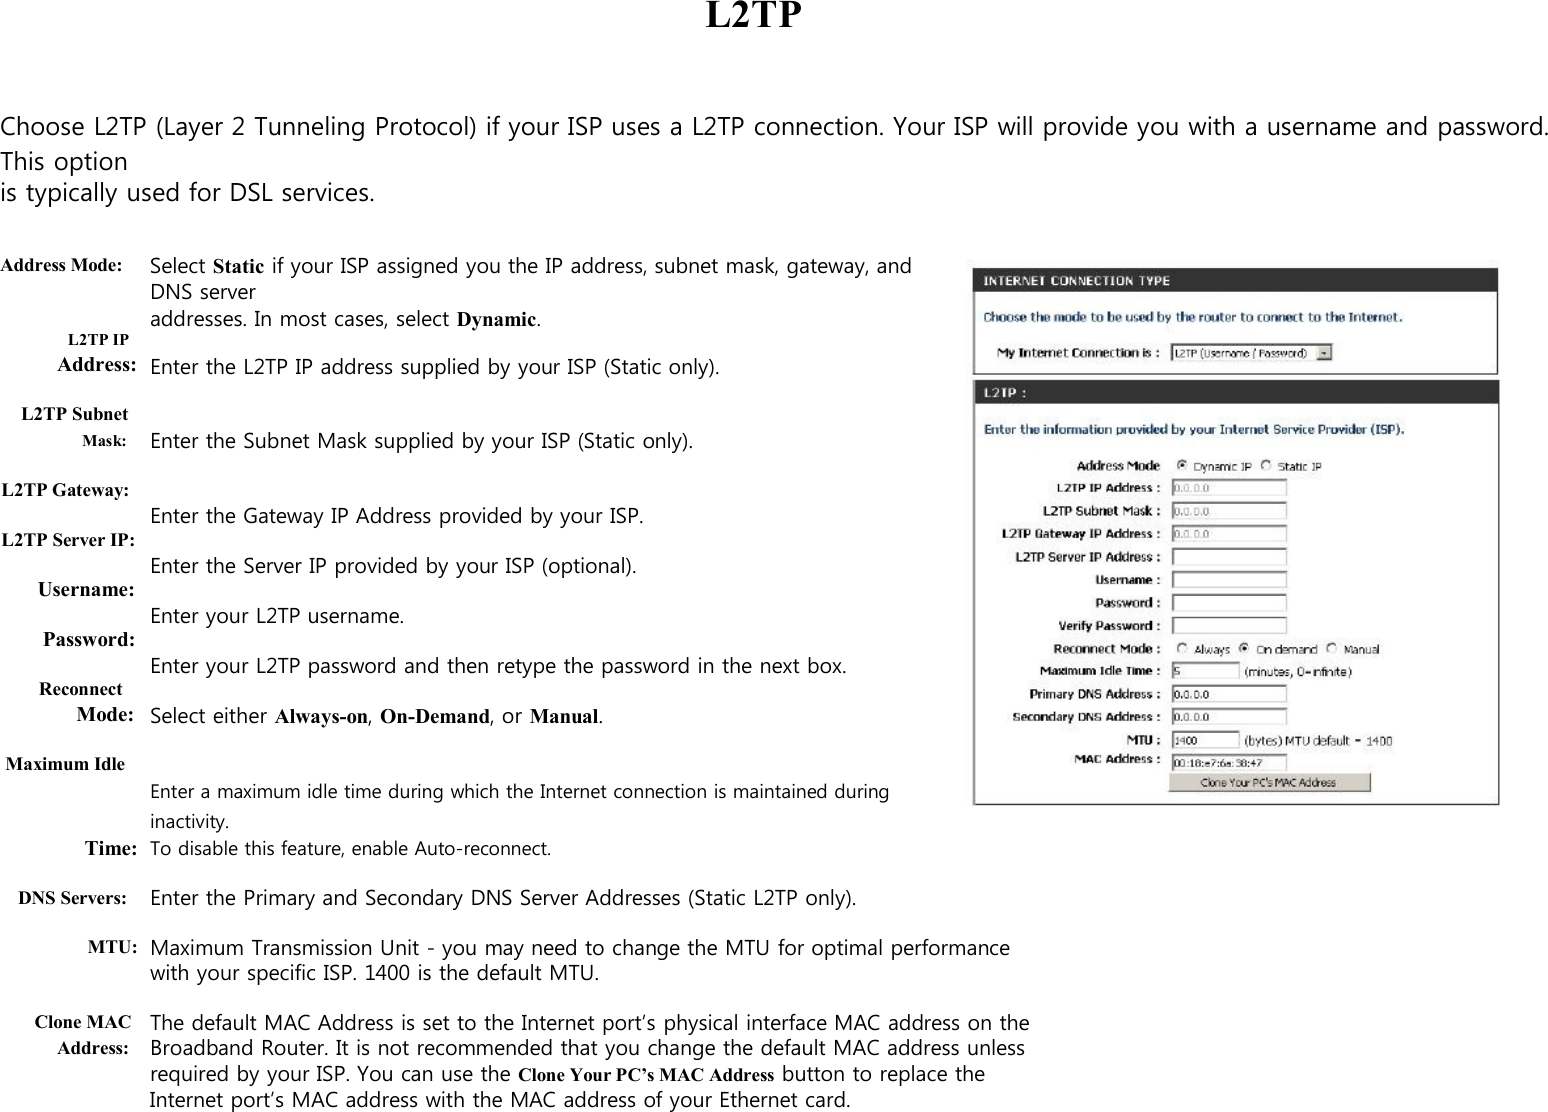        L2TP    Choose L2TP (Layer 2 Tunneling Protocol) if your ISP uses a L2TP connection. Your ISP will provide you with a username and password. This option is typically used for DSL services.   Address Mode:   L2TP IP Address:  L2TP Subnet Mask:  L2TP Gateway:  L2TP Server IP:  Username:  Password:  Reconnect Mode:  Maximum Idle   Select Static if your ISP assigned you the IP address, subnet mask, gateway, and DNS server   addresses. In most cases, select Dynamic.  Enter the L2TP IP address supplied by your ISP (Static only).   Enter the Subnet Mask supplied by your ISP (Static only).   Enter the Gateway IP Address provided by your ISP.  Enter the Server IP provided by your ISP (optional).  Enter your L2TP username.  Enter your L2TP password and then retype the password in the next box.  Select either Always-on, On-Demand, or Manual.   Enter a maximum idle time during which the Internet connection is maintained during inactivity. Time:   To disable this feature, enable Auto-reconnect.  DNS Servers:  MTU:   Clone MAC Address:  Enter the Primary and Secondary DNS Server Addresses (Static L2TP only).  Maximum Transmission Unit - you may need to change the MTU for optimal performance with your specific ISP. 1400 is the default MTU.  The default MAC Address is set to the Internet port’s physical interface MAC address on the Broadband Router. It is not recommended that you change the default MAC address unless required by your ISP. You can use the Clone Your PC’s MAC Address button to replace the Internet port’s MAC address with the MAC address of your Ethernet card.     